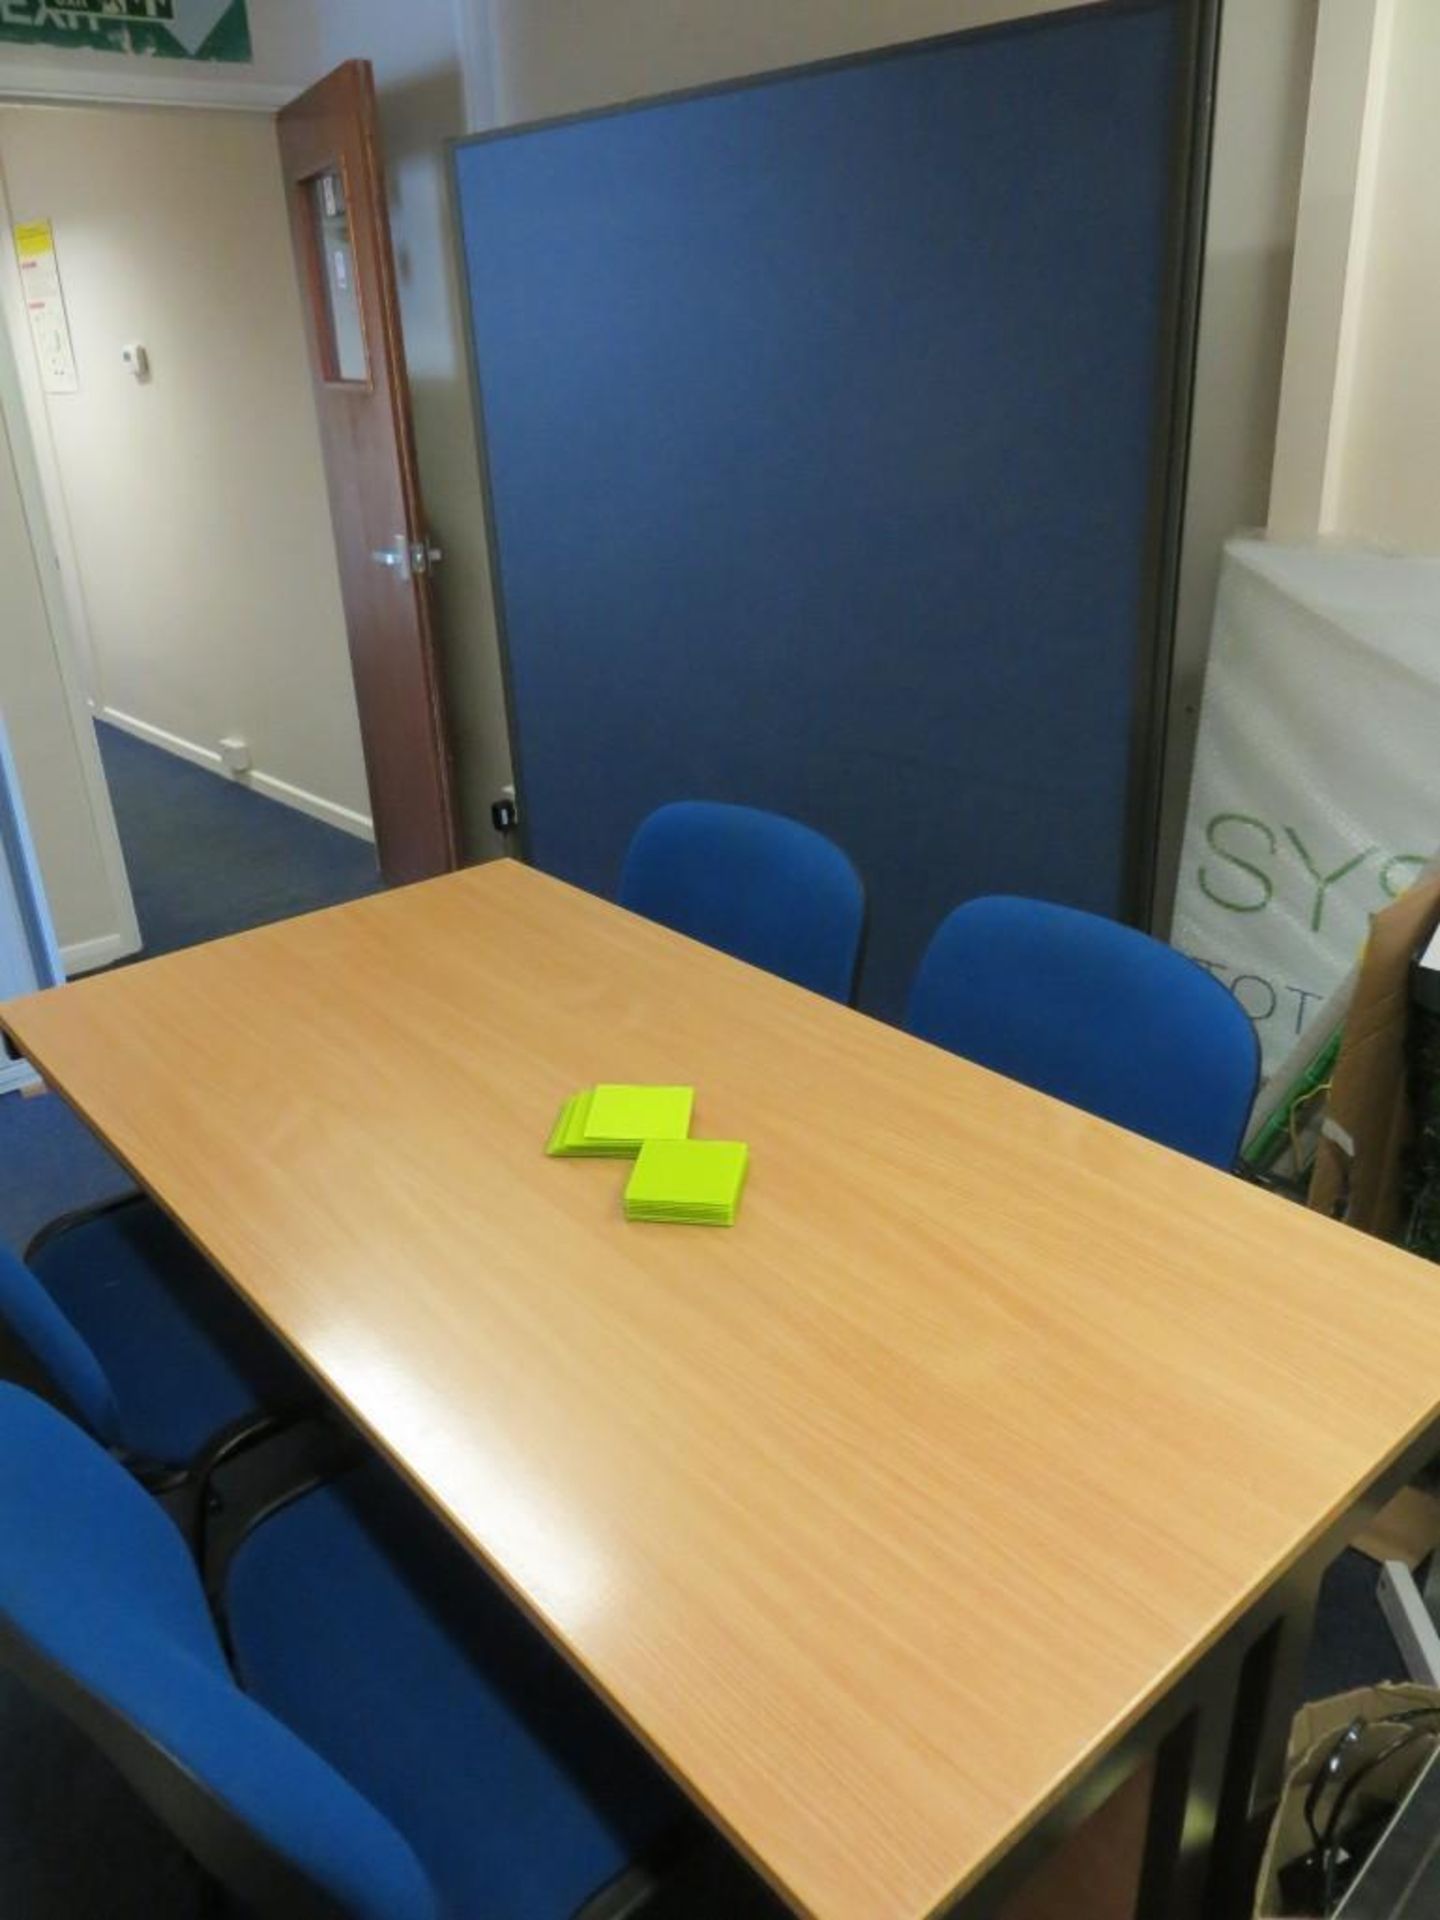 Contents of the meeting room to include: - Image 4 of 4